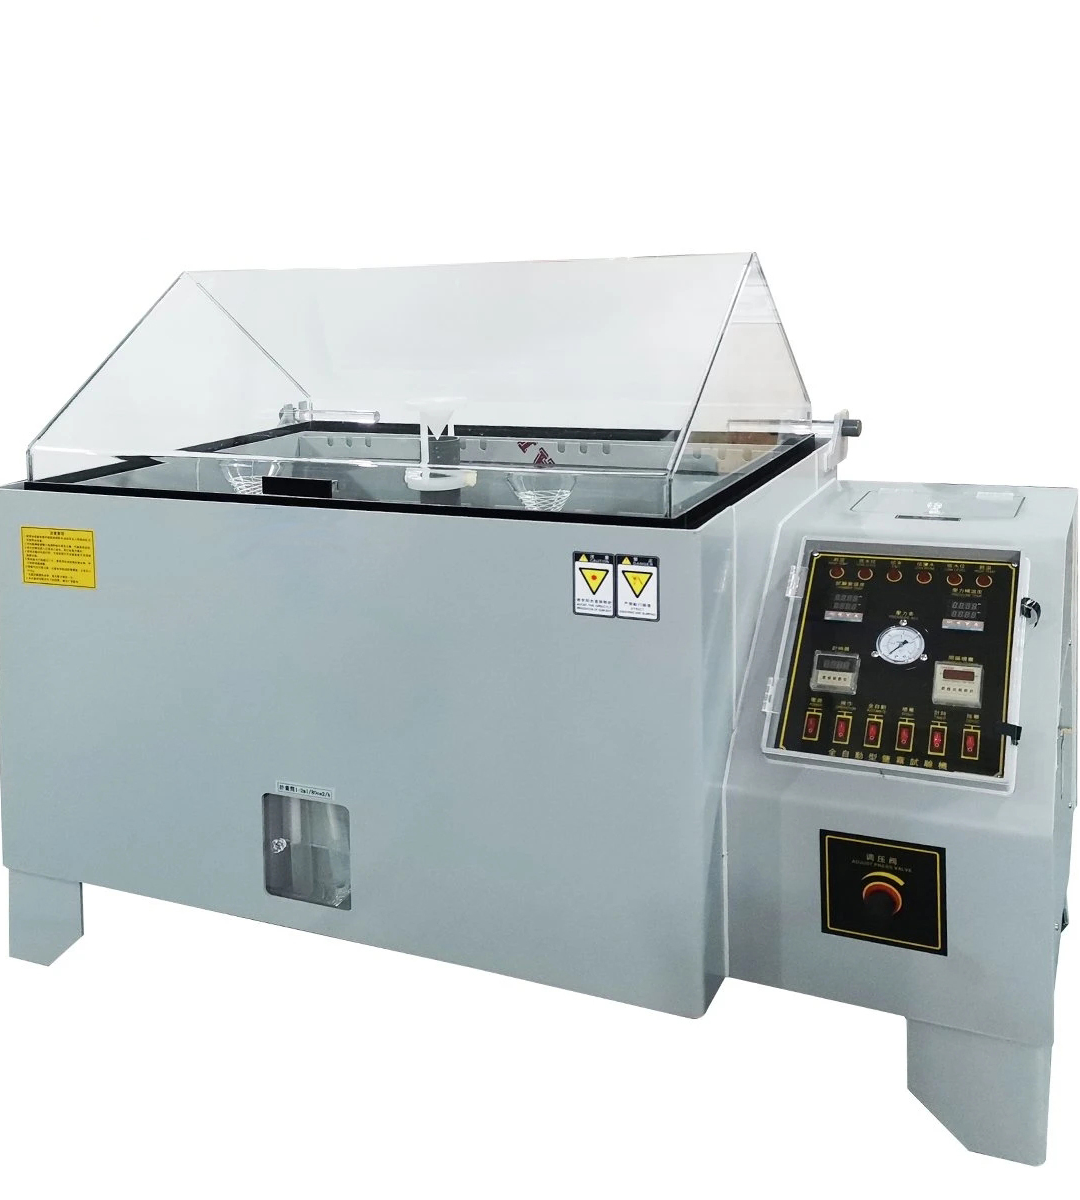 Customize Your Salt Spray Test Chamber to Meet Your Corrosion Resistance Testing Needs